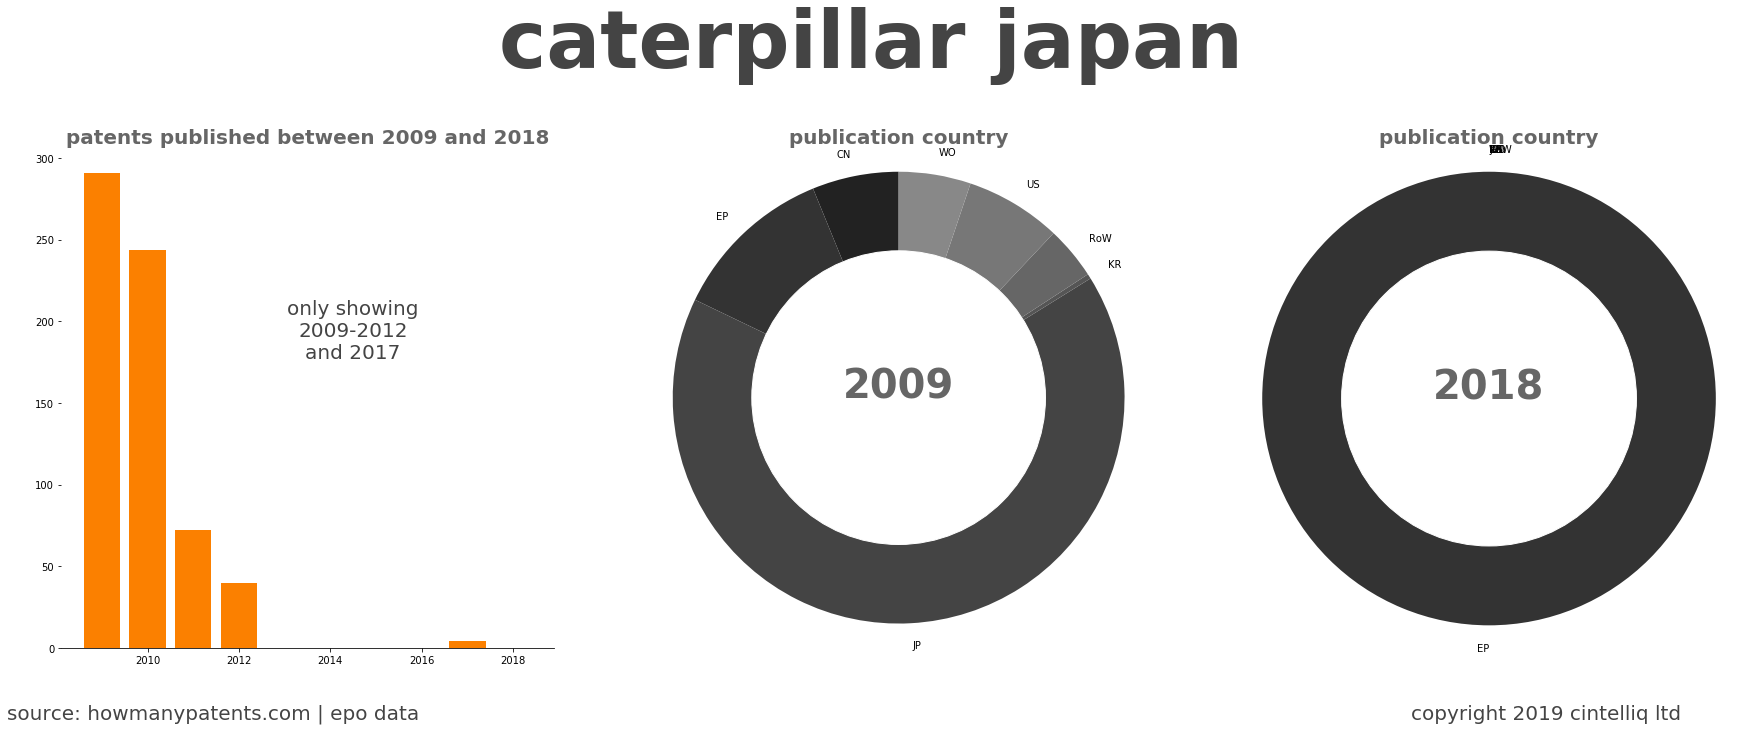 summary of patents for Caterpillar Japan